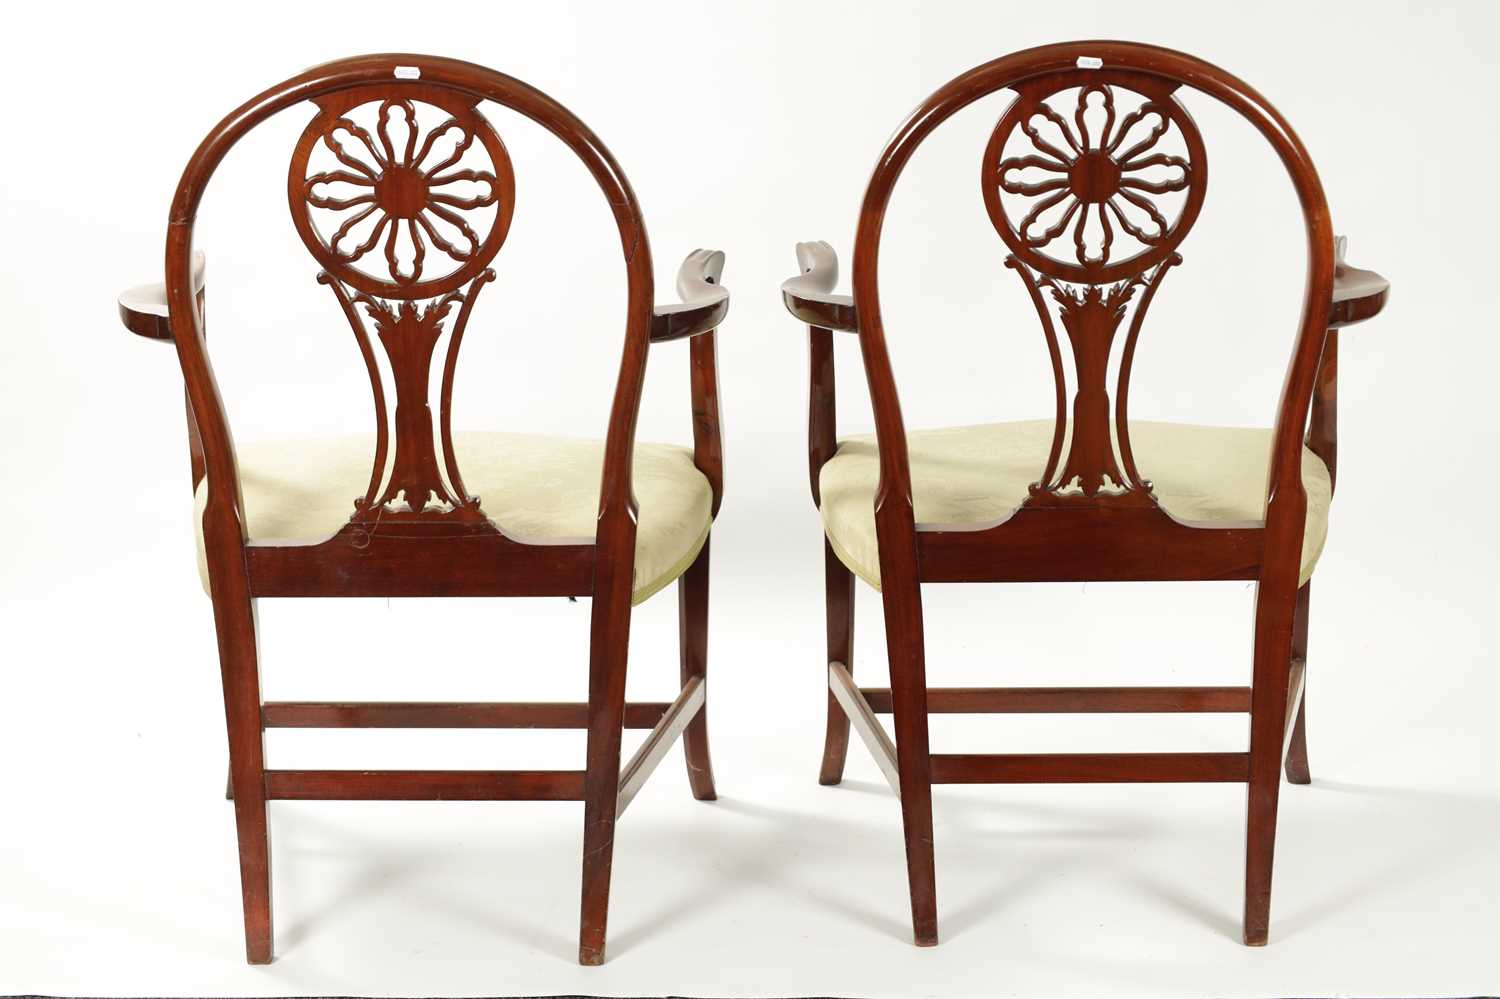 A PAIR OF 19TH CENTURY HEPPLEWHITE STYLE MAHOGANY ARMCHAIRS - Image 11 of 12